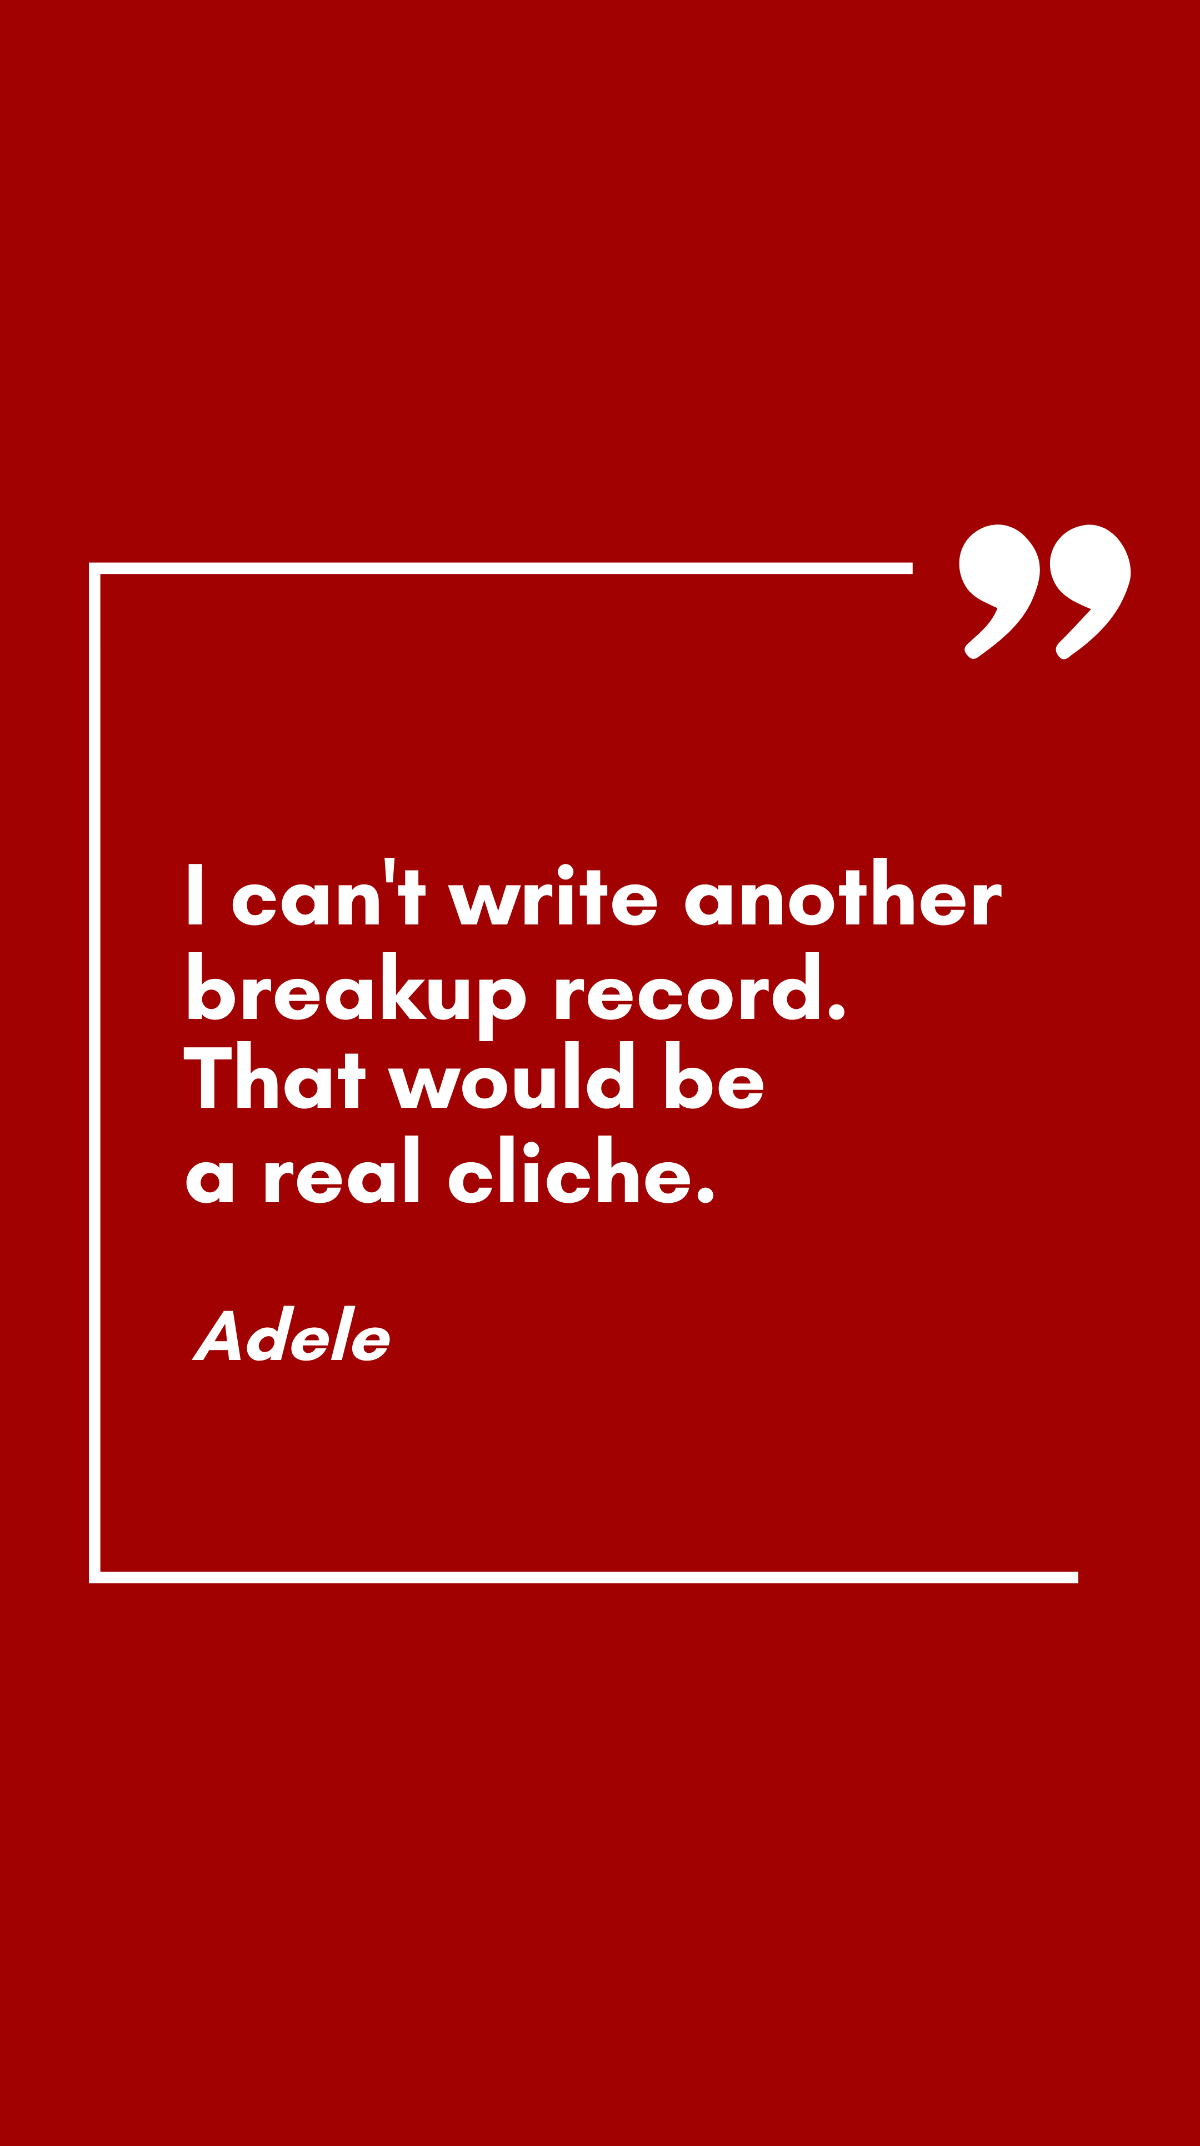 Adele - I can't write another breakup record. That would be a real cliche.